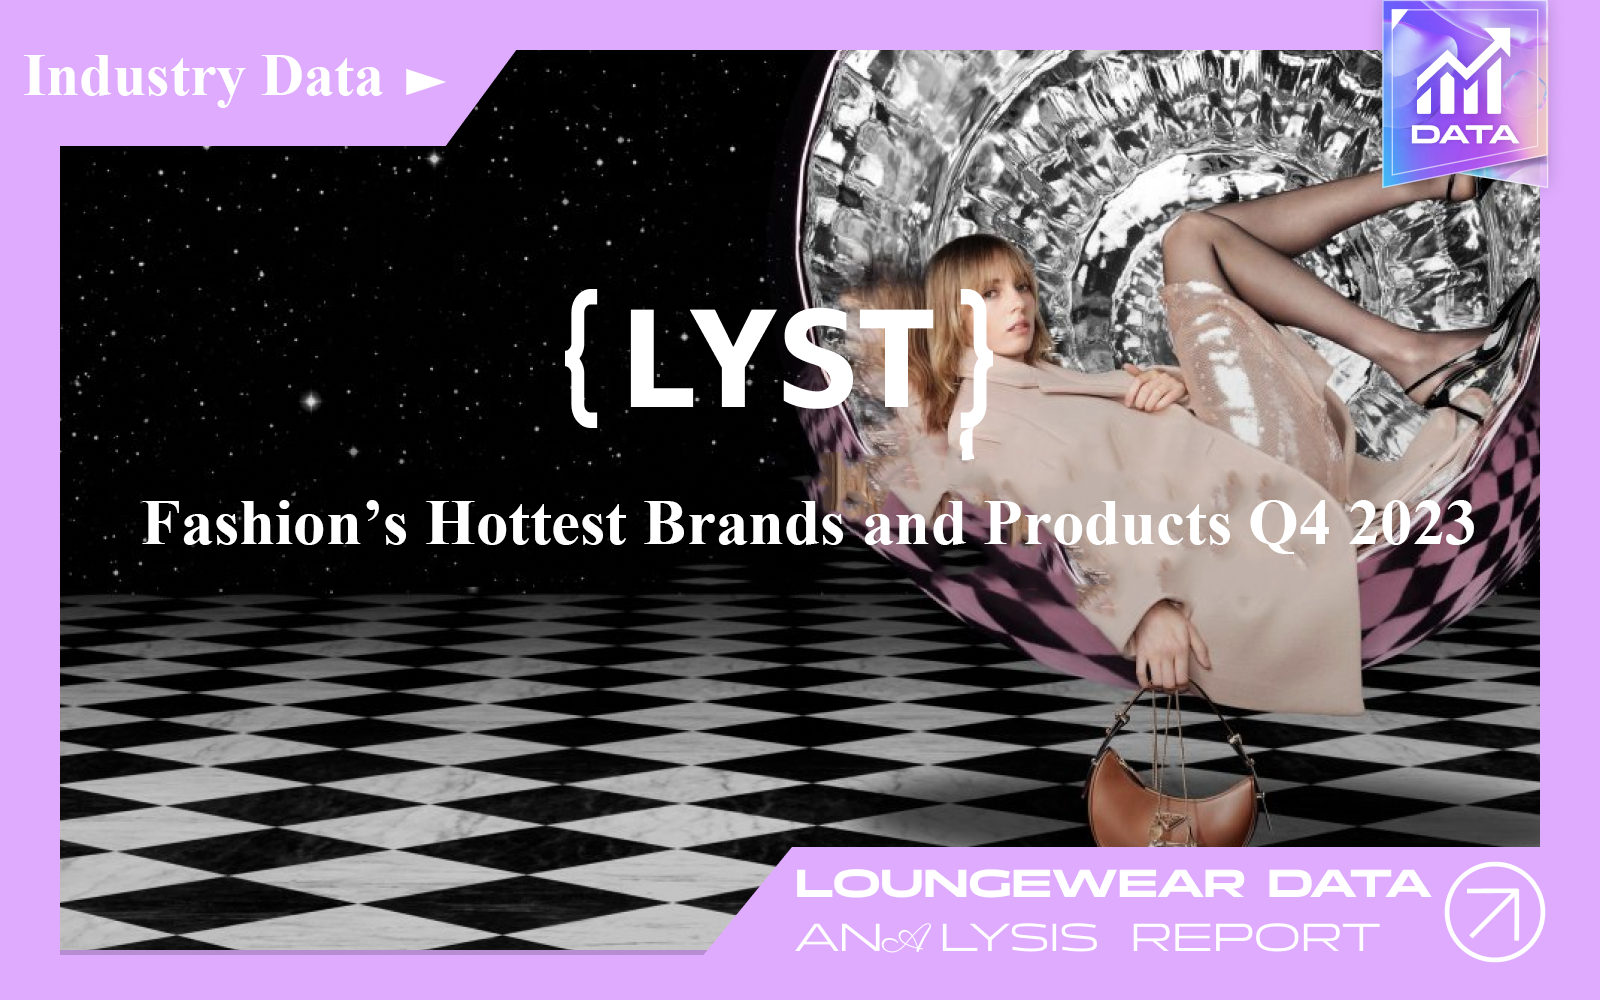 The Lyst Index -- Fashion's Hottest Brands and Products Q4 2023